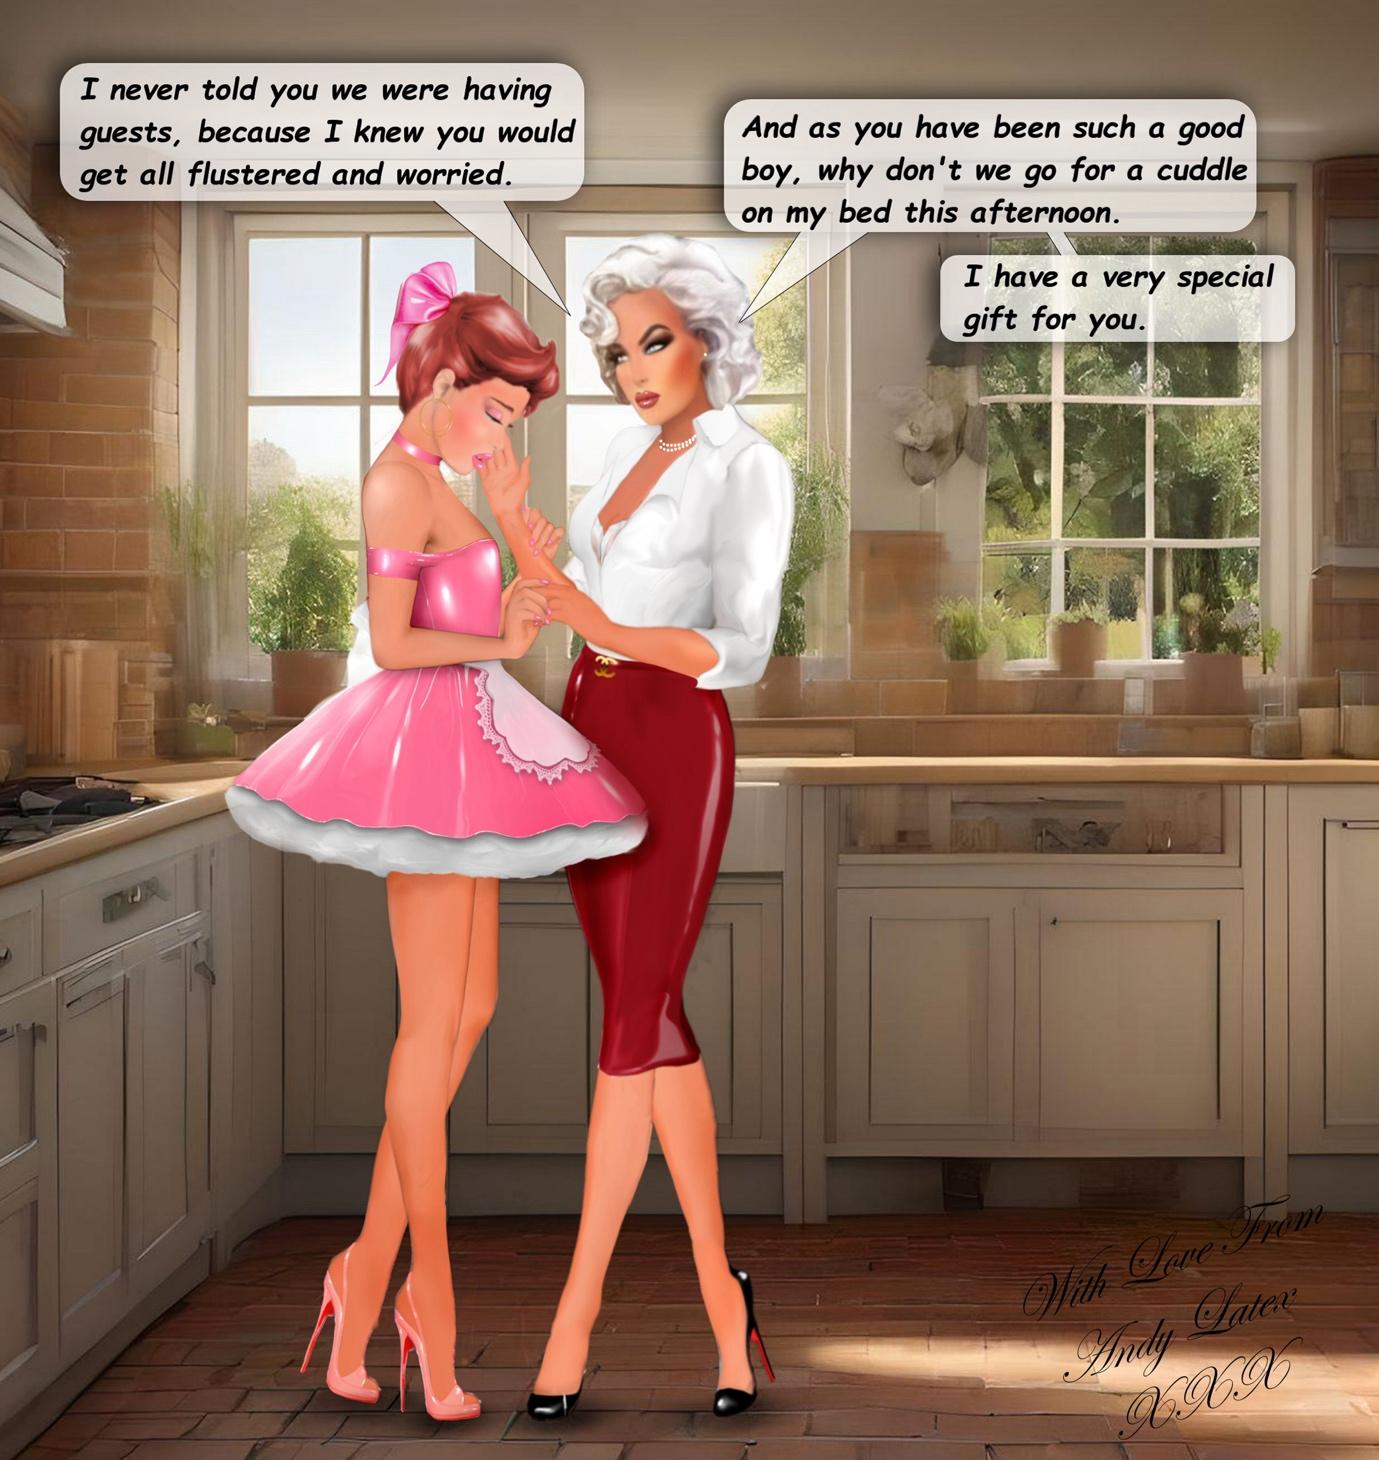 A cartoon of two women in a kitchen

Description automatically generated